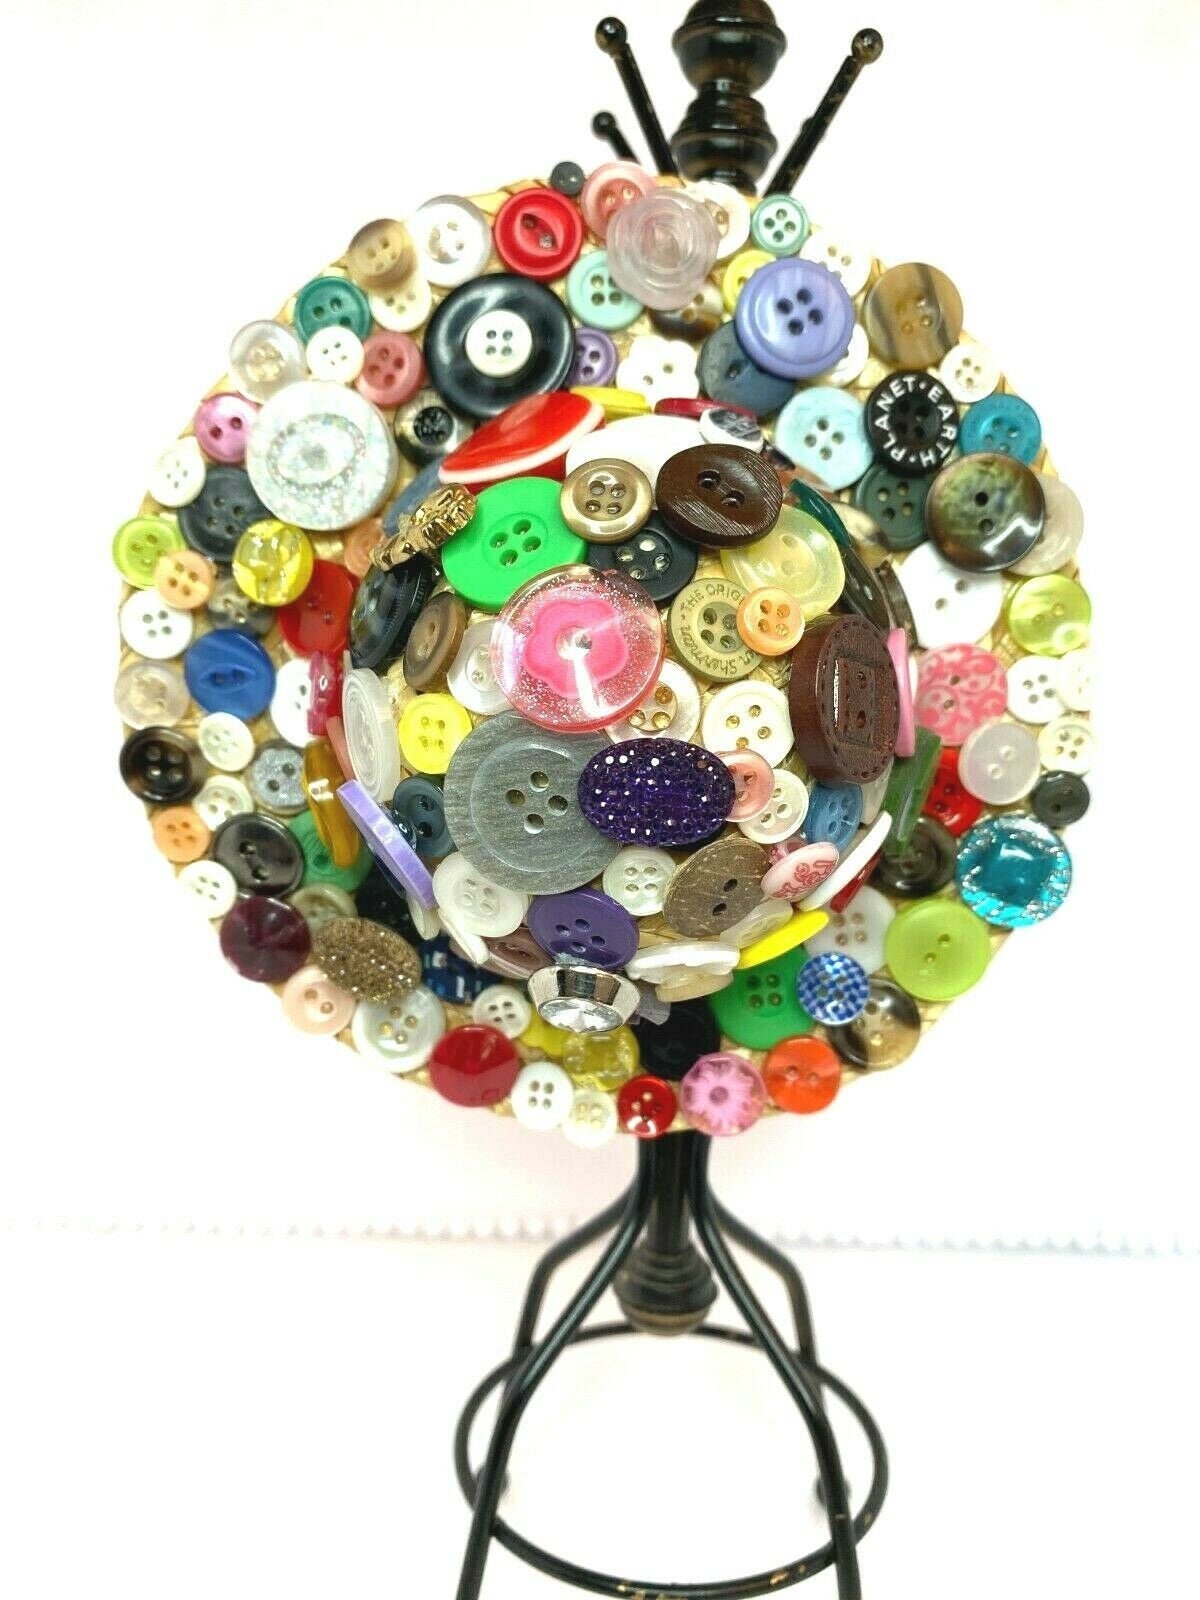 Handmade Button Straw Whicker Hat Wall Hanging 5.5 Inch. Sewing Room Art.